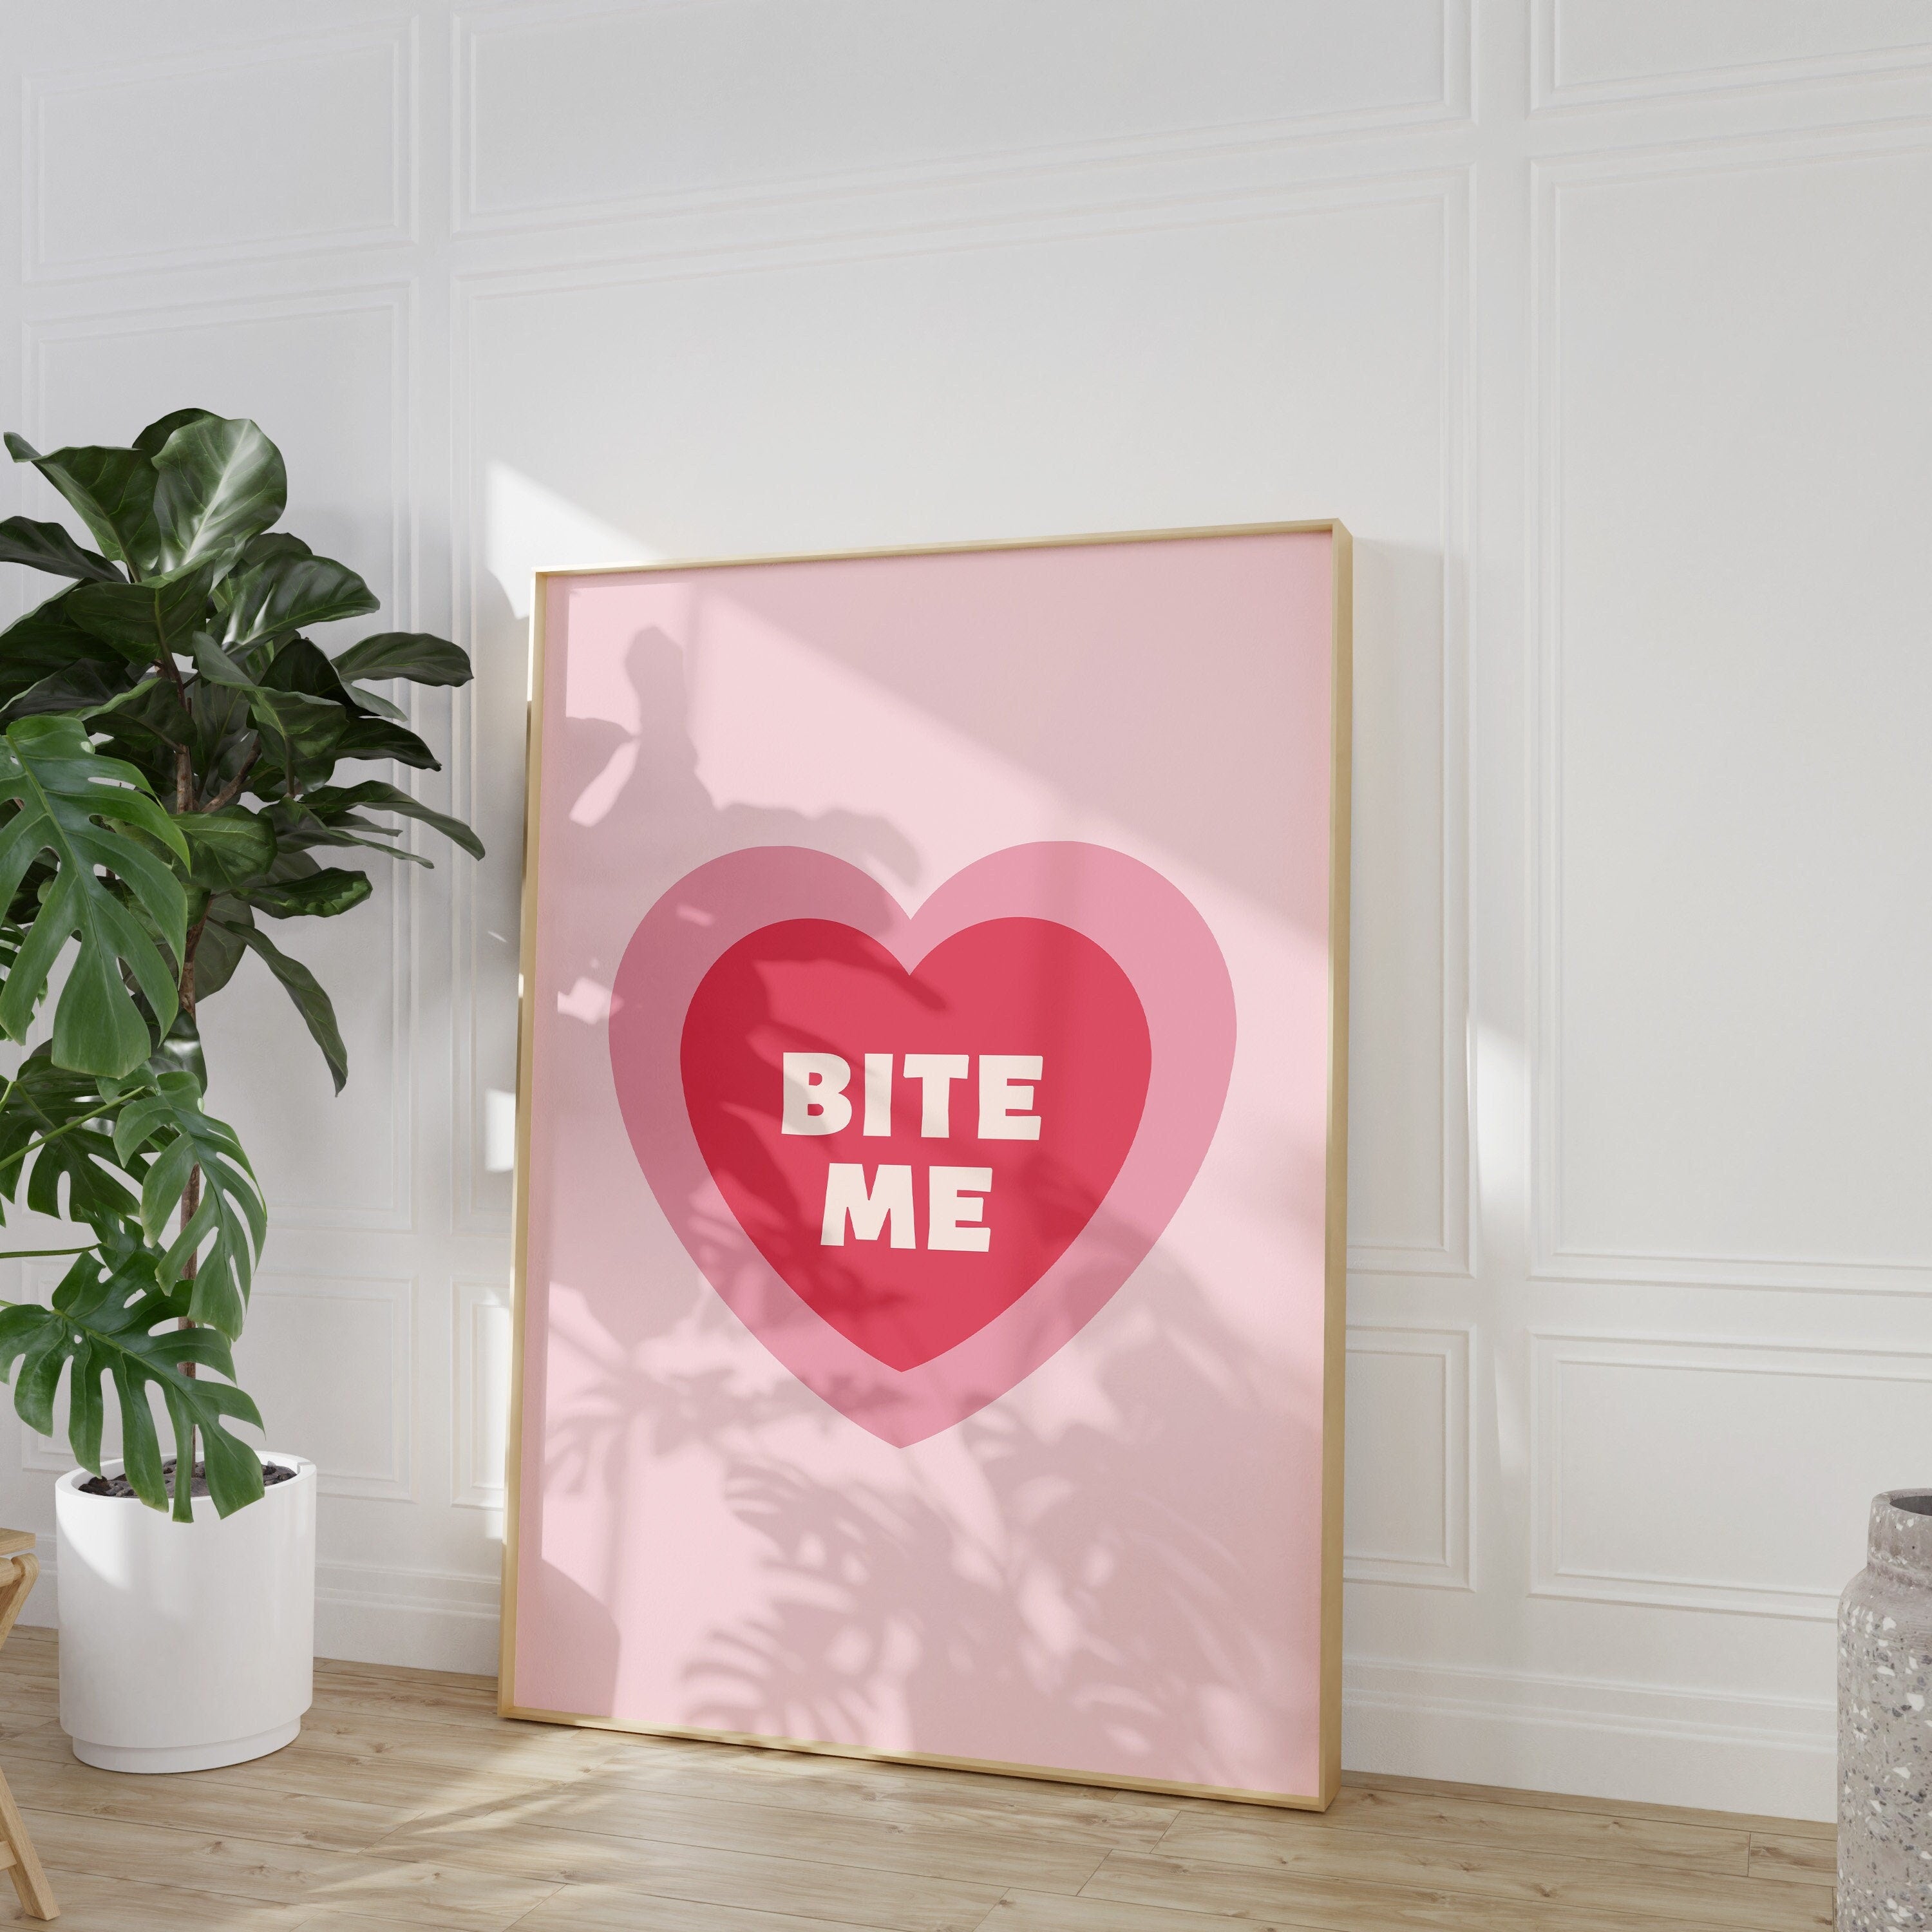 The 'Bite Me Art Print' displayed in a minimalist interior for a chic aesthetic.